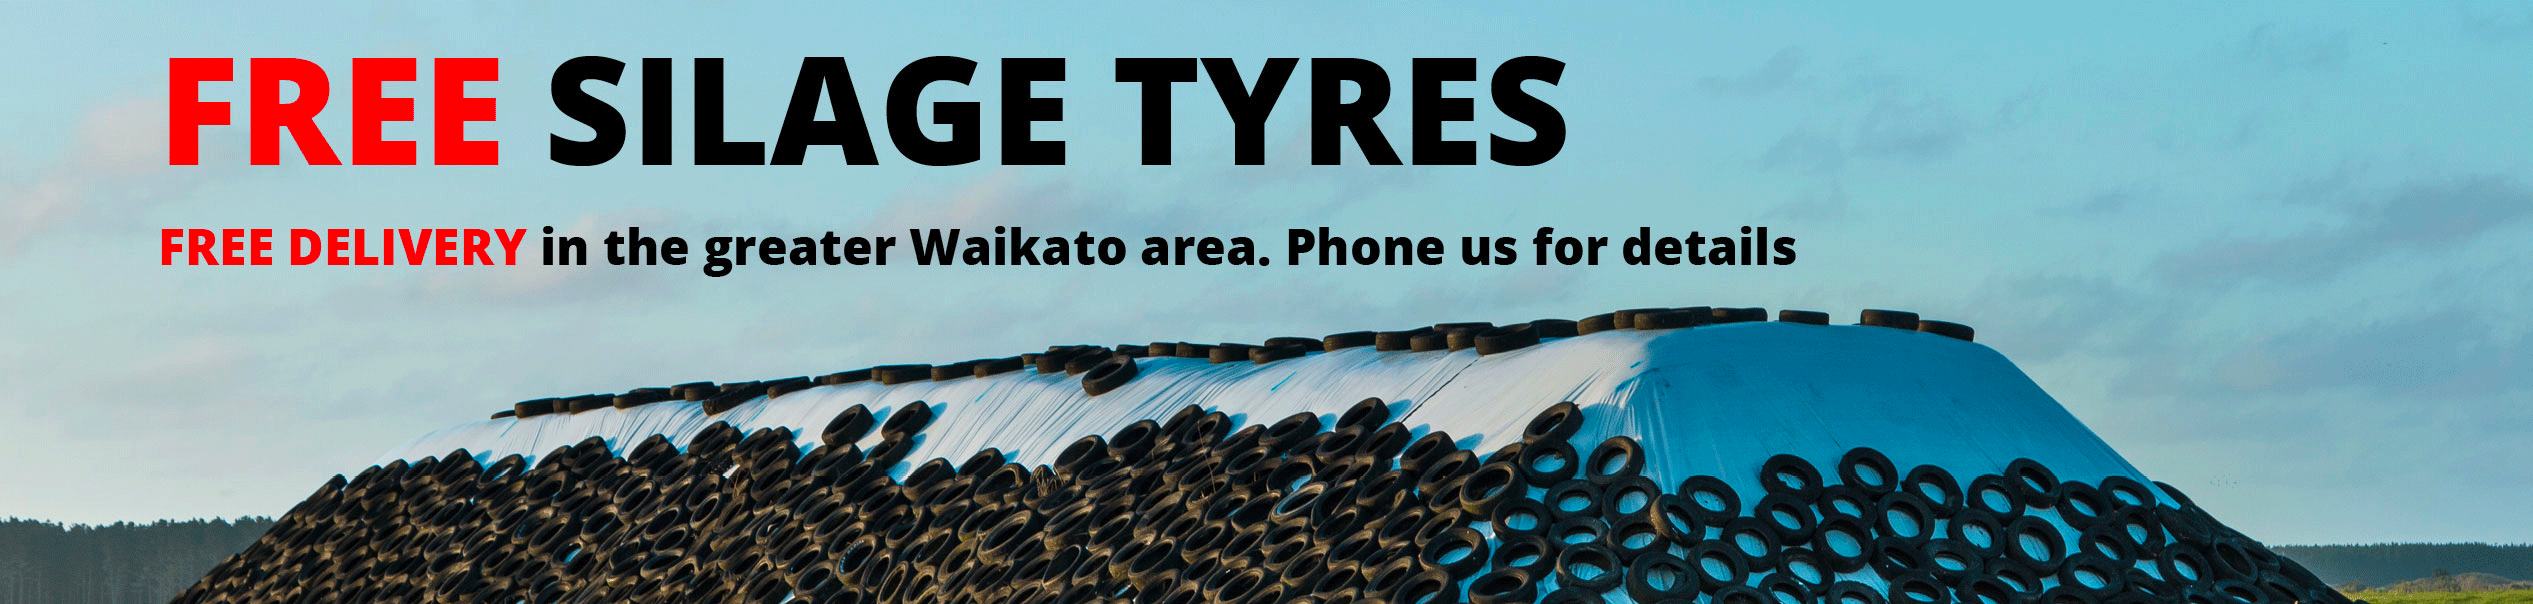 TYRE RECYCLING WAIKATO Banner